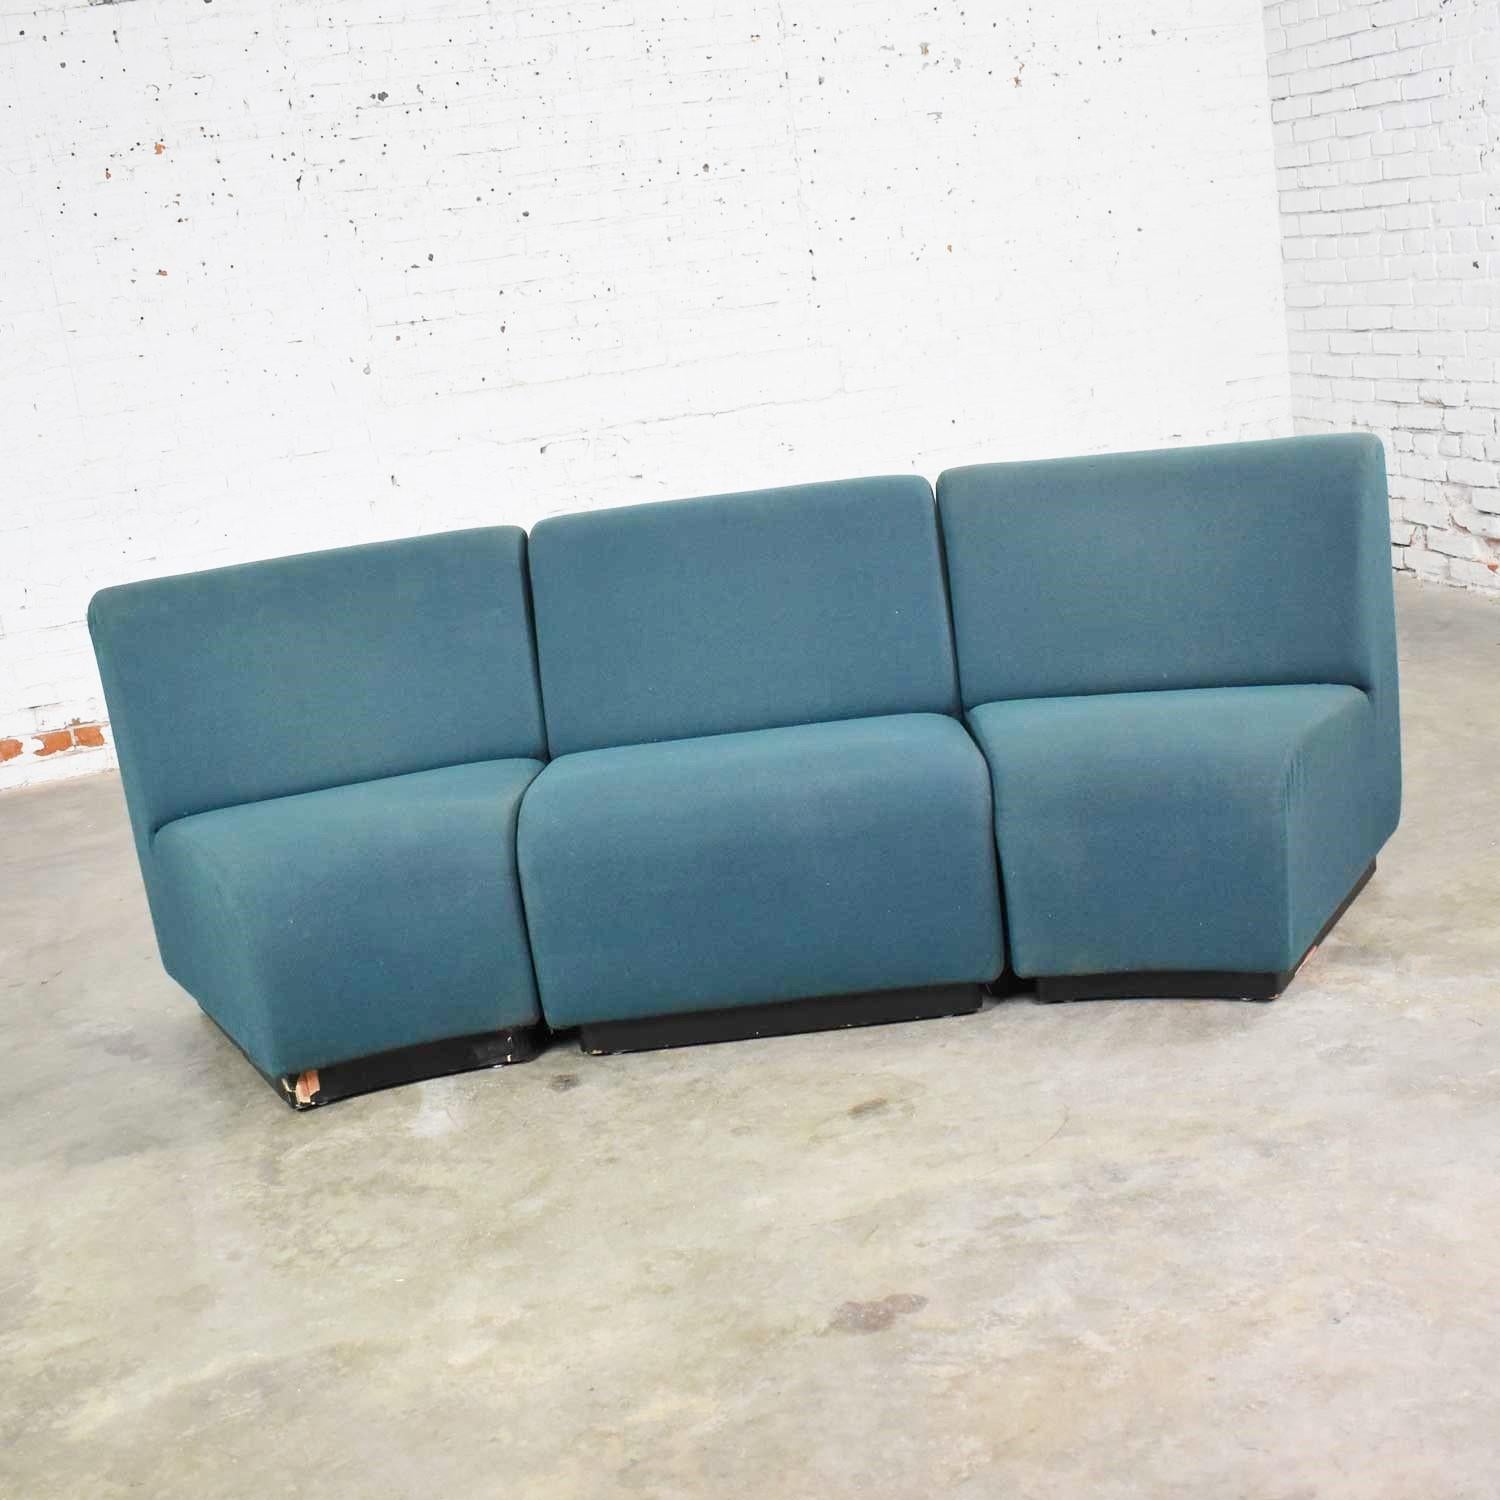 Moderne August Inc Modernity Modular Sectional Sofa Straight & Wedge Pieces Style Chadwick en vente